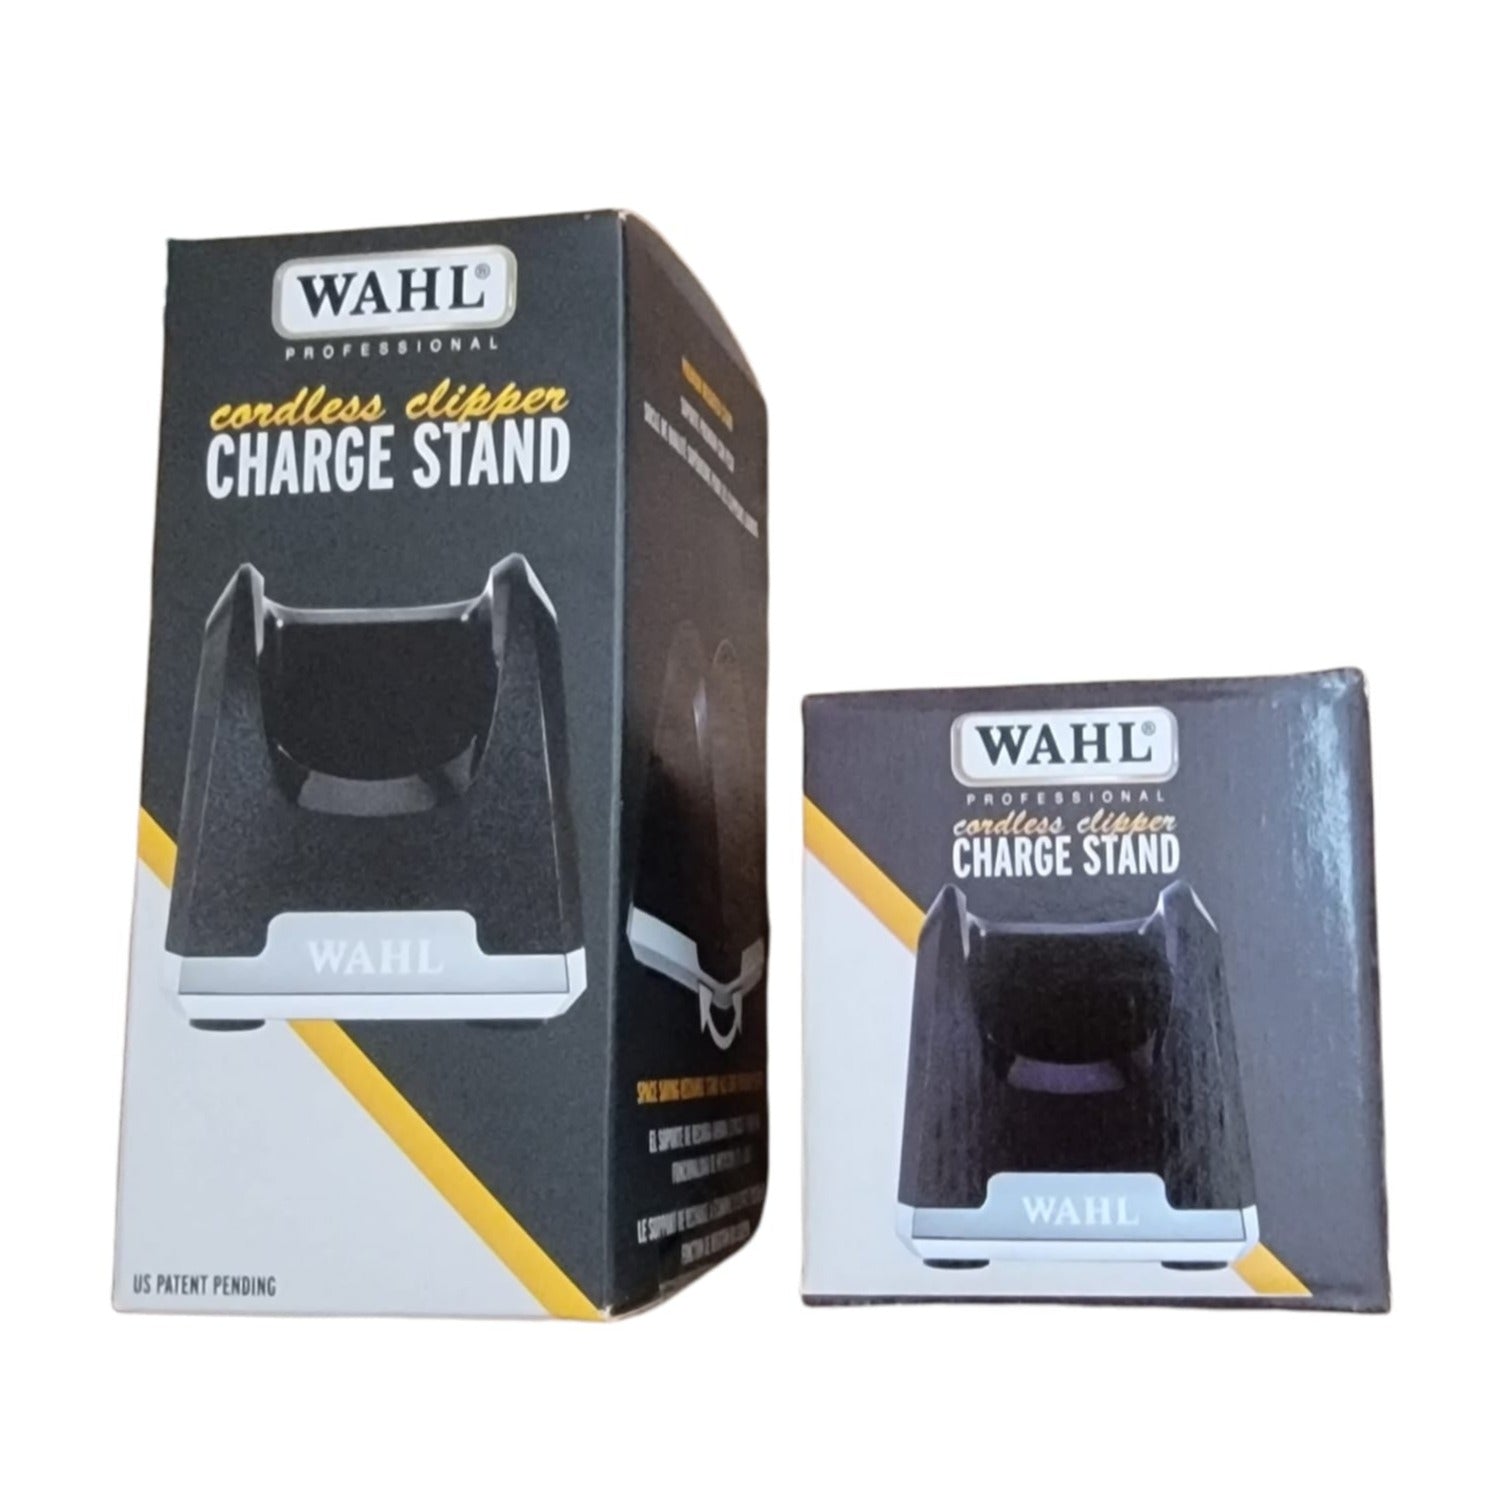 Wahl Professional Cordless Clipper Charger Stand Model 3801